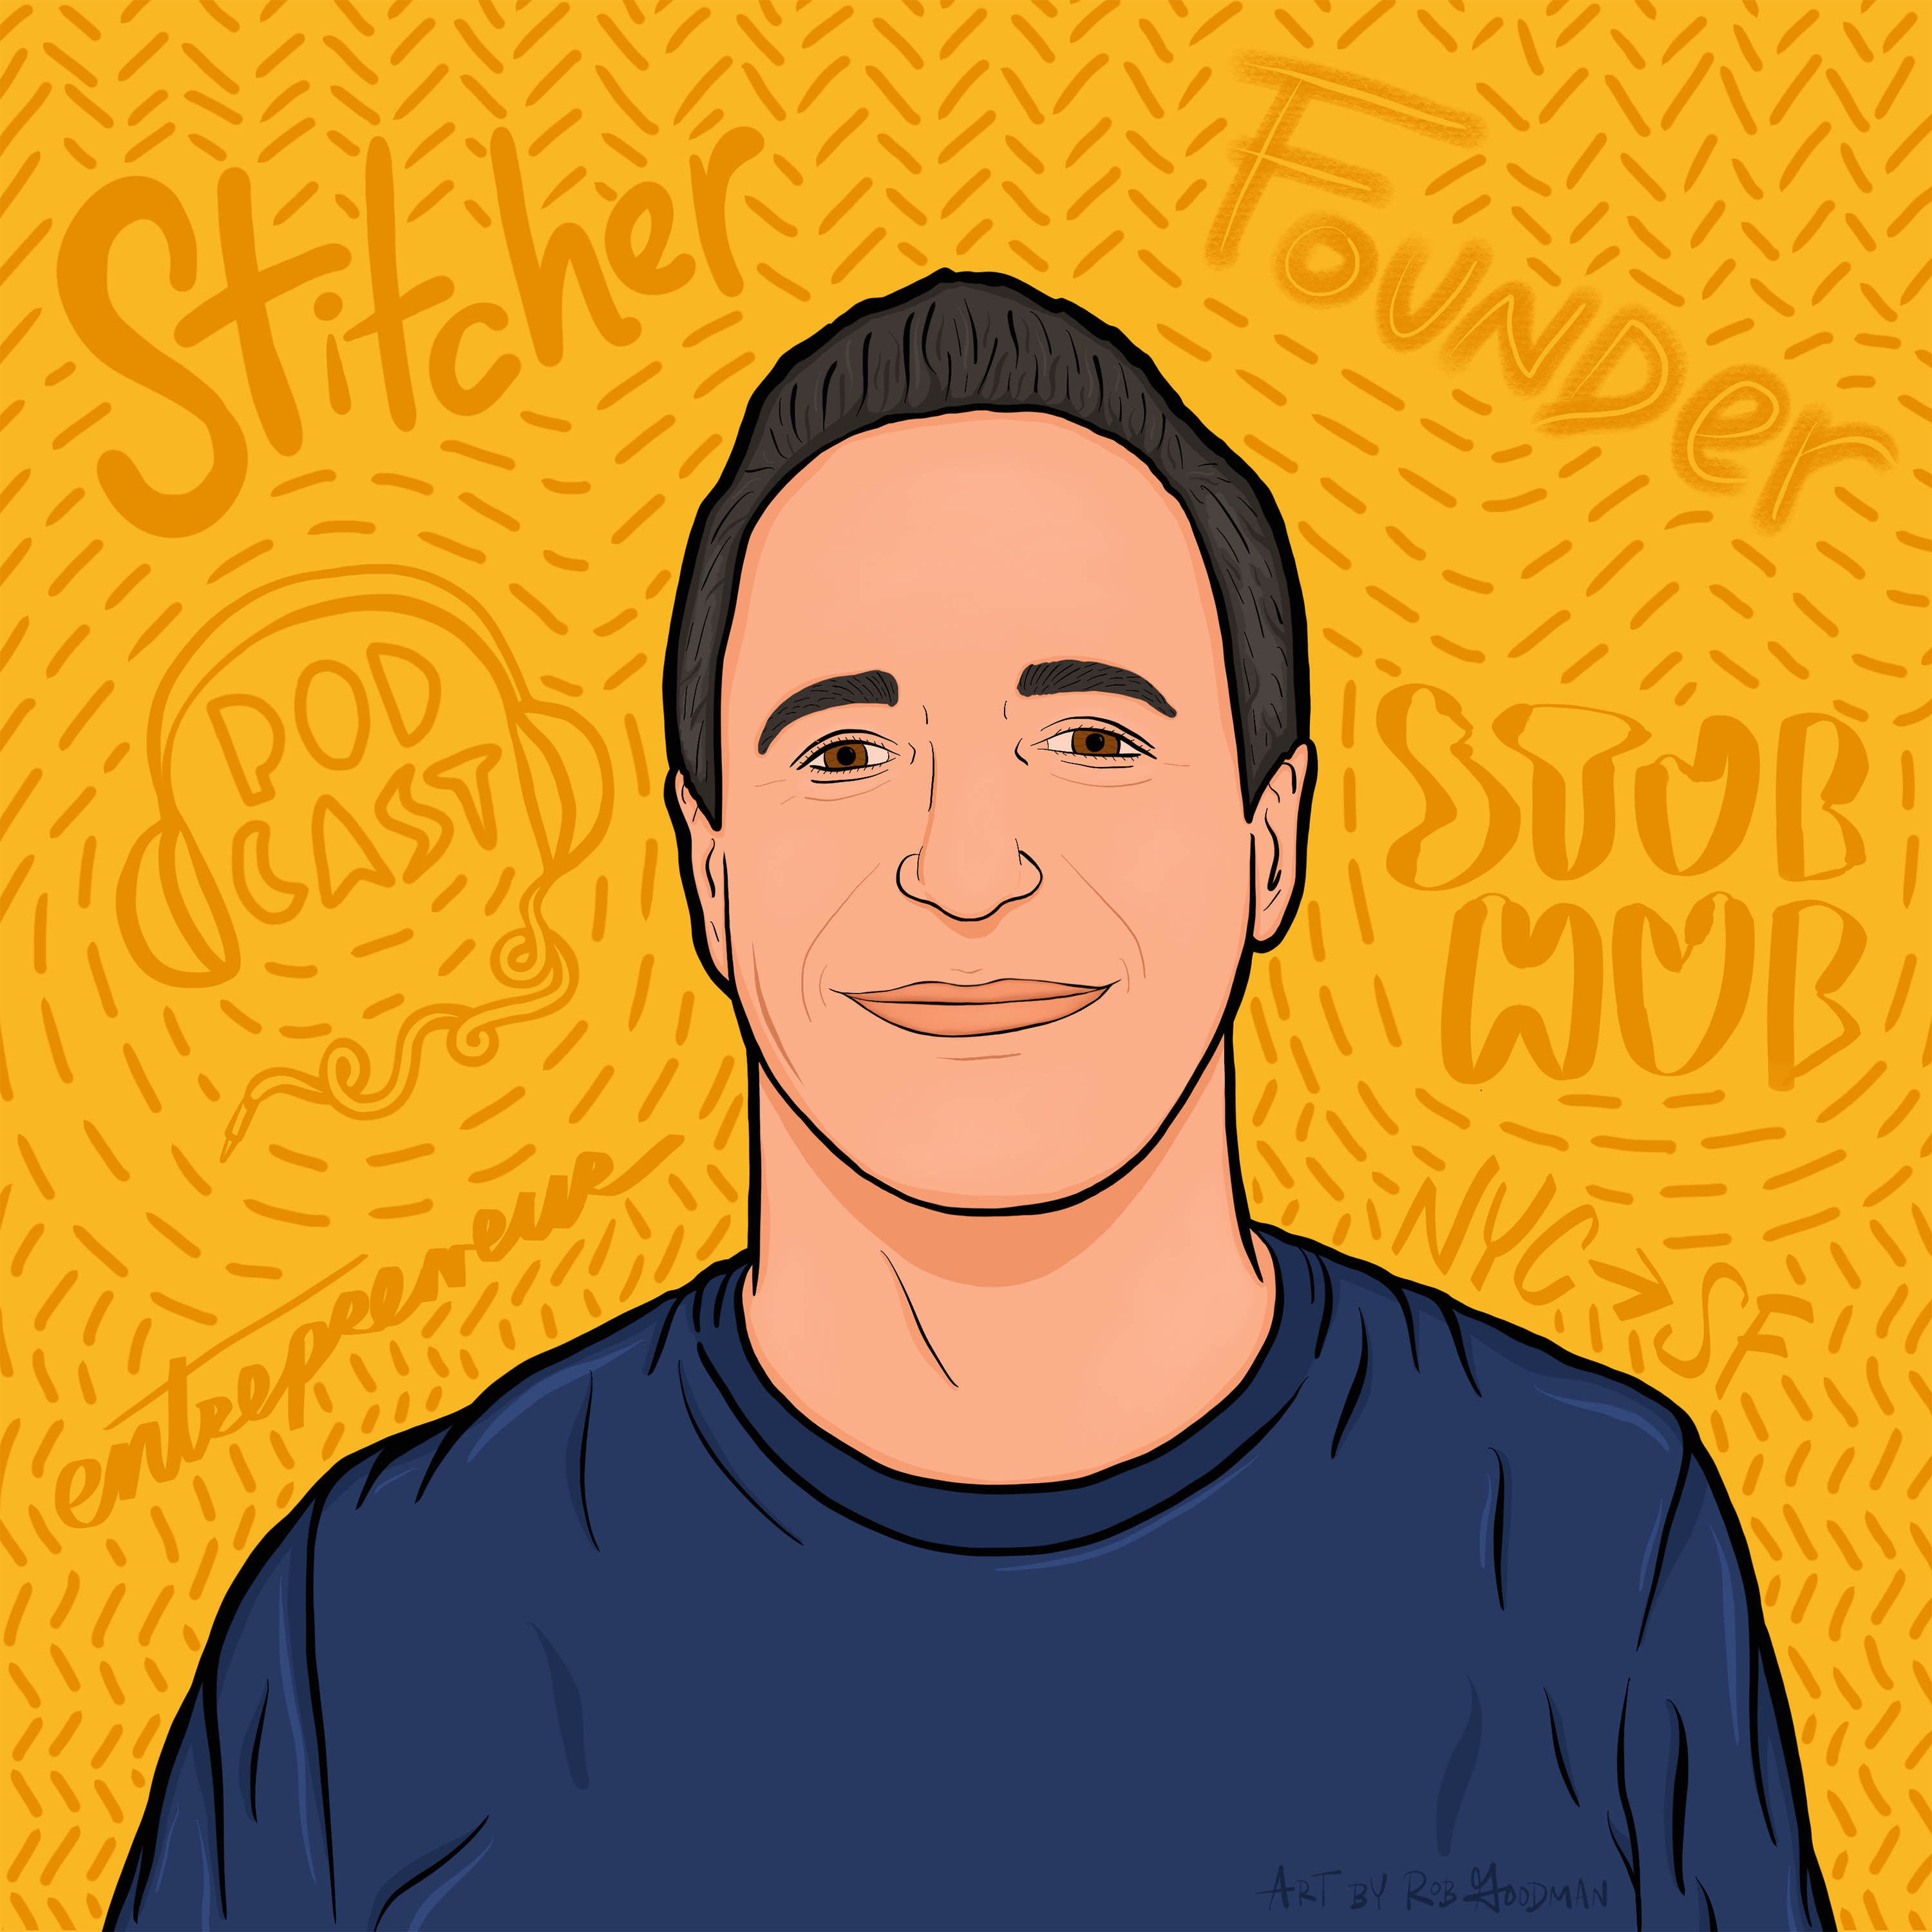 Getting Out of Your Own Way with Noah Shanok, Founder of Stitcher